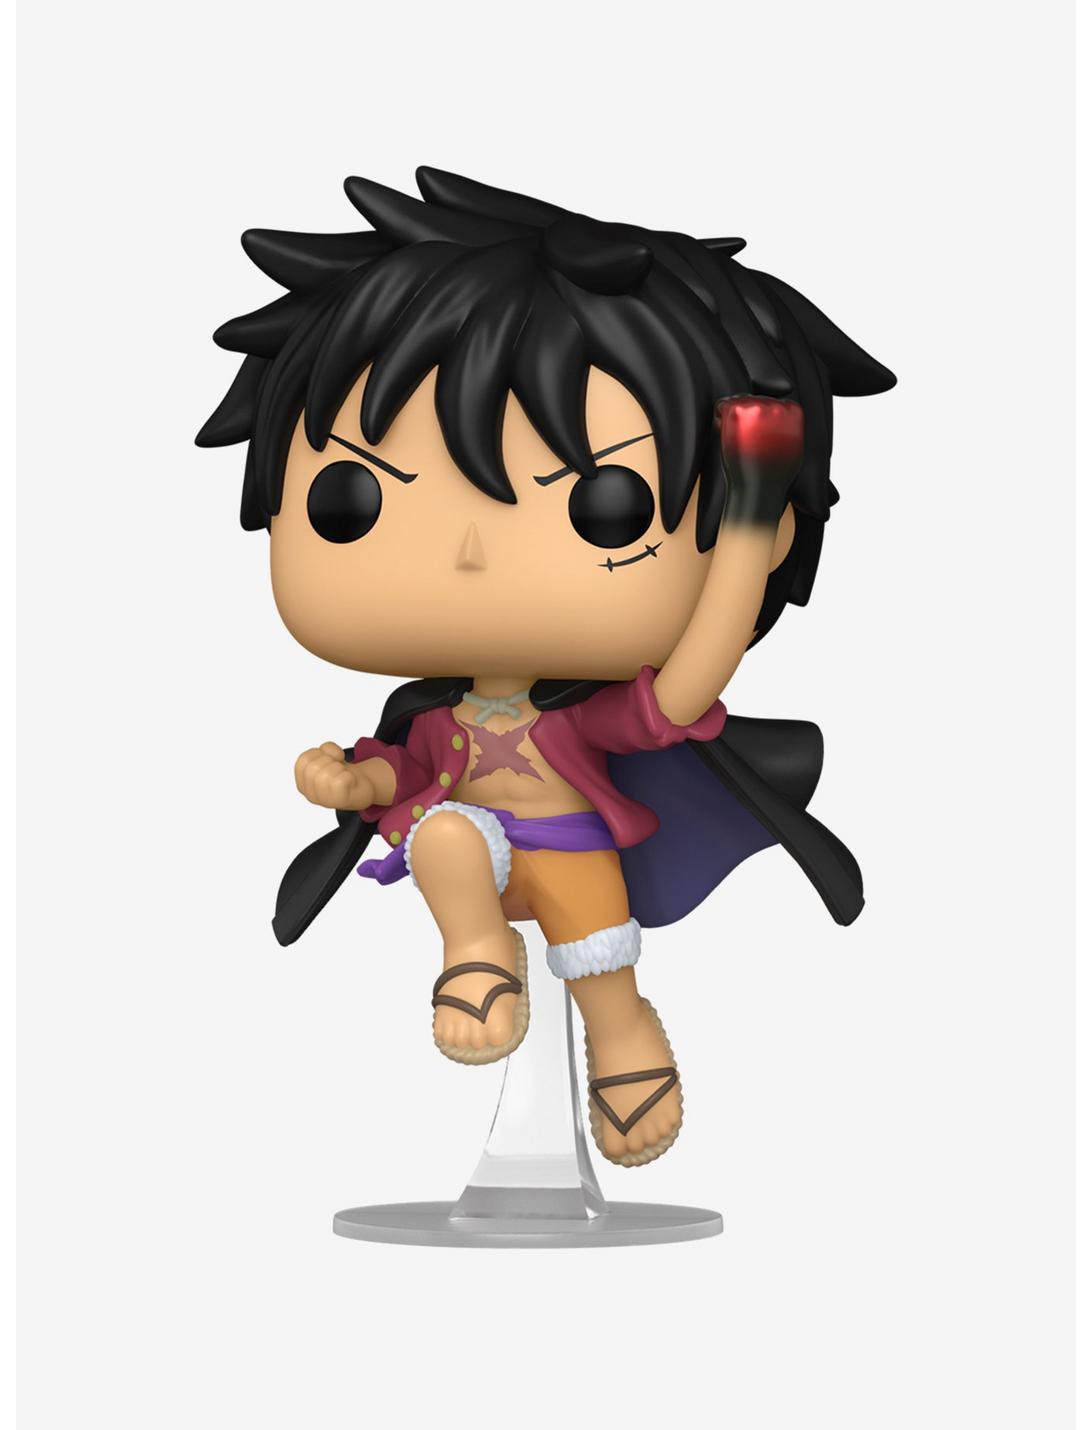 Funko Pop! Animation One Piece Luffy Vinyl Figure - BoxLunch Exclusive, , hi-res